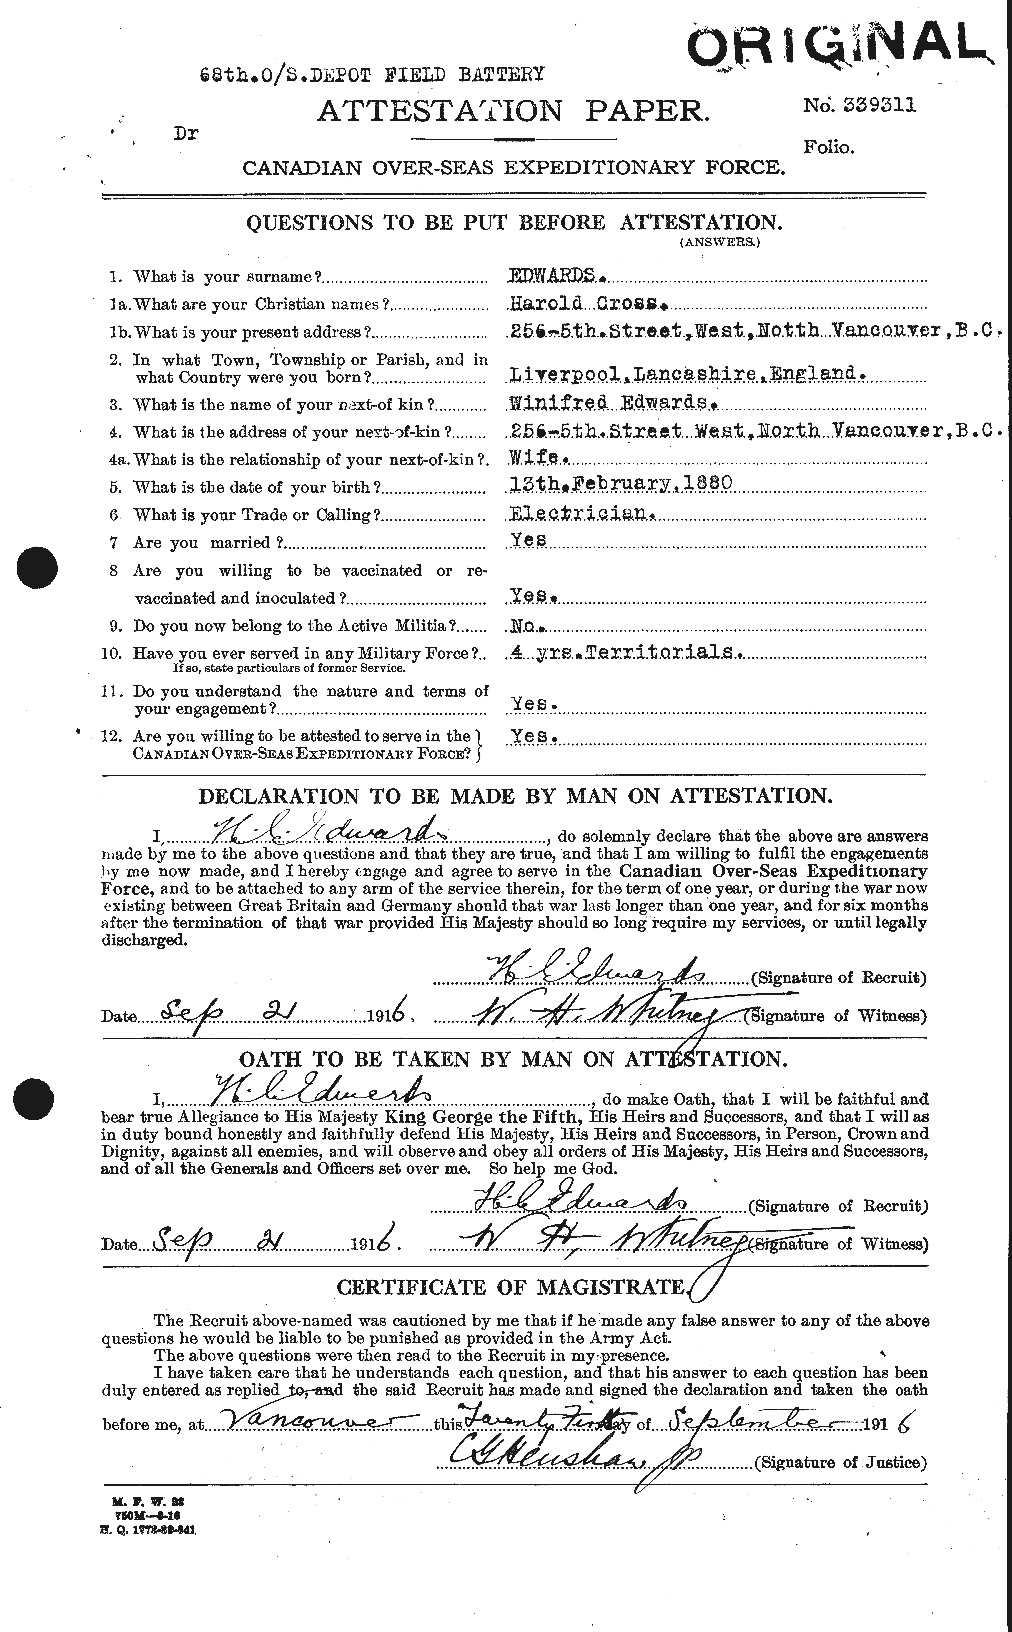 Personnel Records of the First World War - CEF 309719a